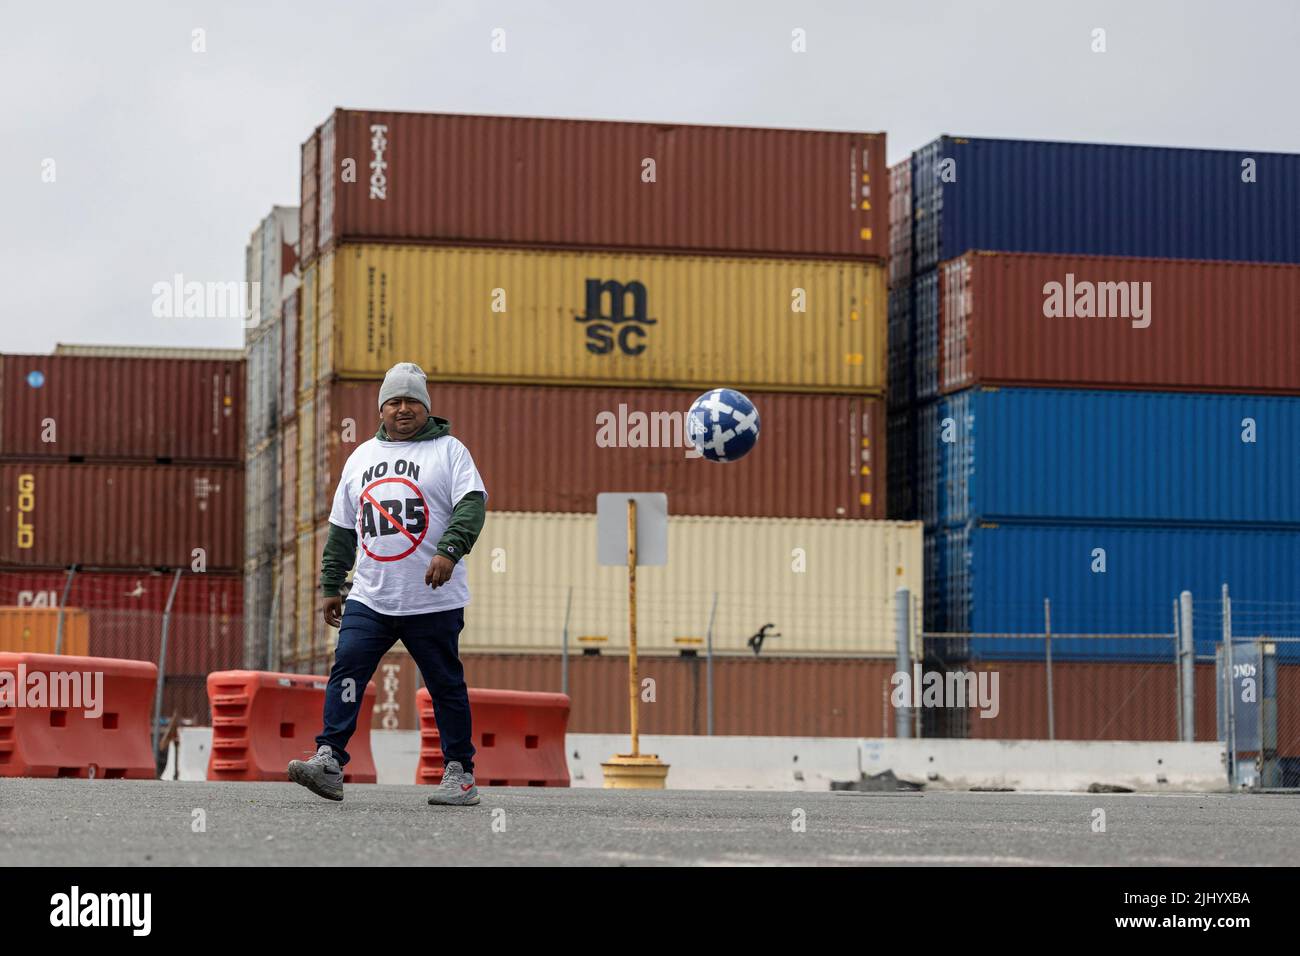 A truck driver plays soccer as he joins a gathering to block the entrance of trucks at a container terminal at the Port of Oakland, during a protest against California's law known as AB5, in Oakland, California, July 21, 2022. REUTERS/Carlos Barria Stock Photo